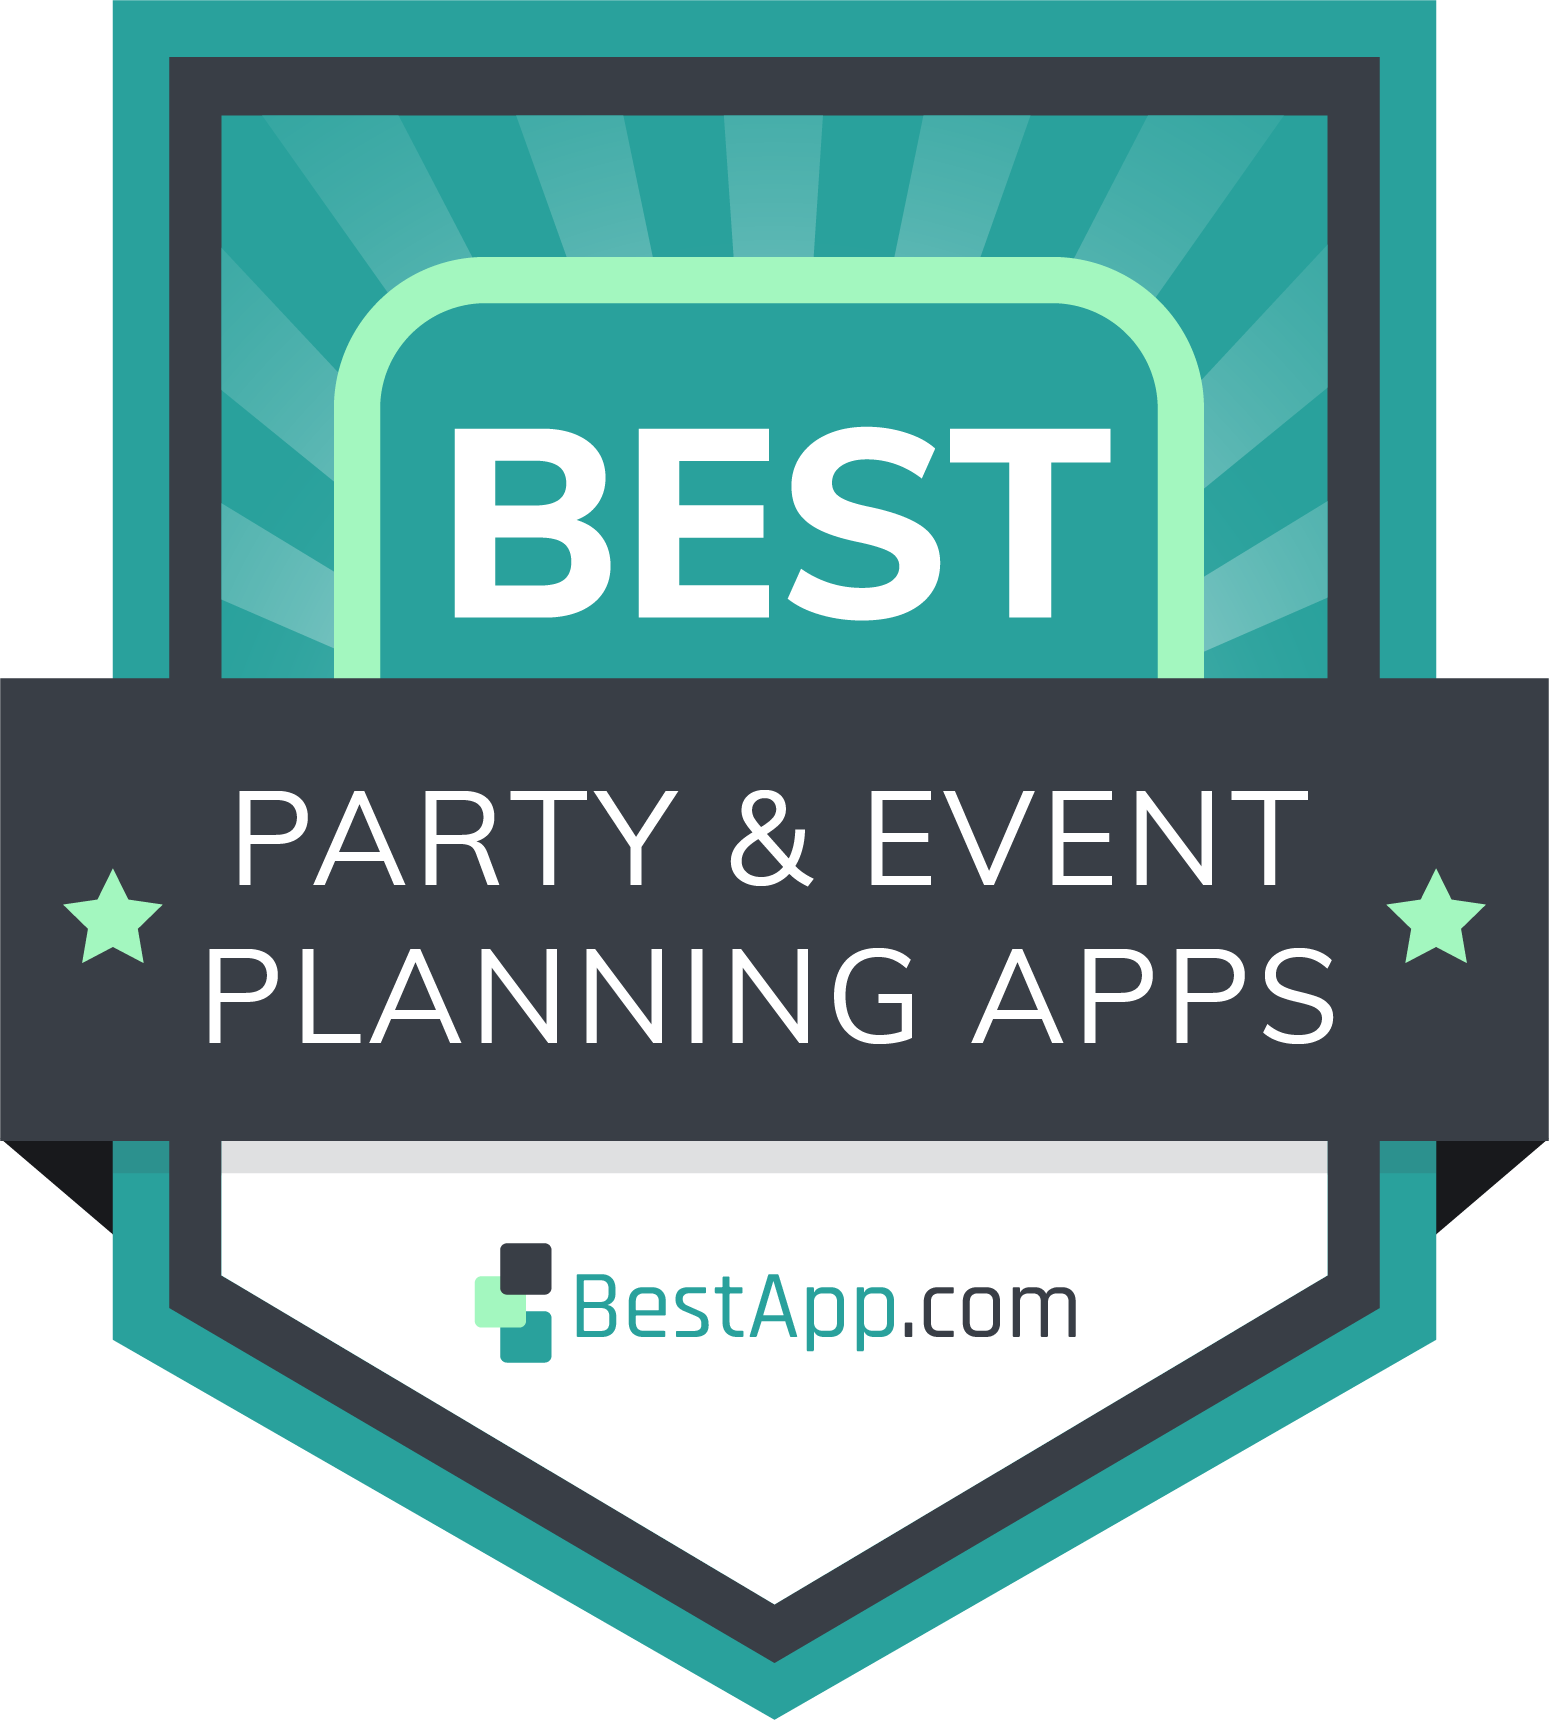 Best Party and Event Planning Apps Badge